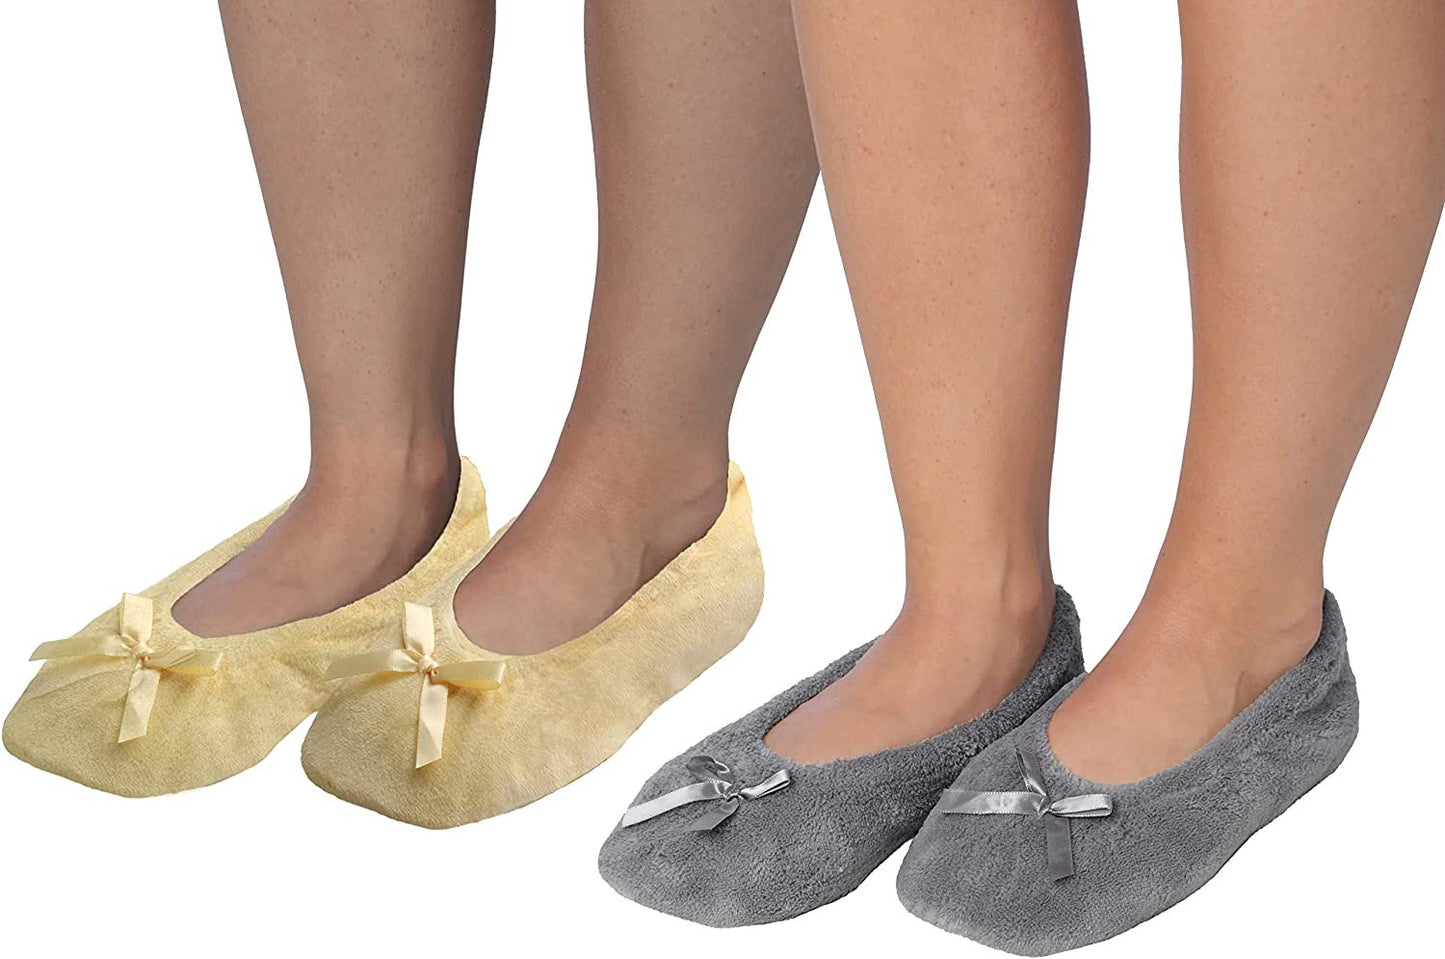 Roxoni Women's Terry Classic Cotton Ballerina Slippers (Pack of 2)